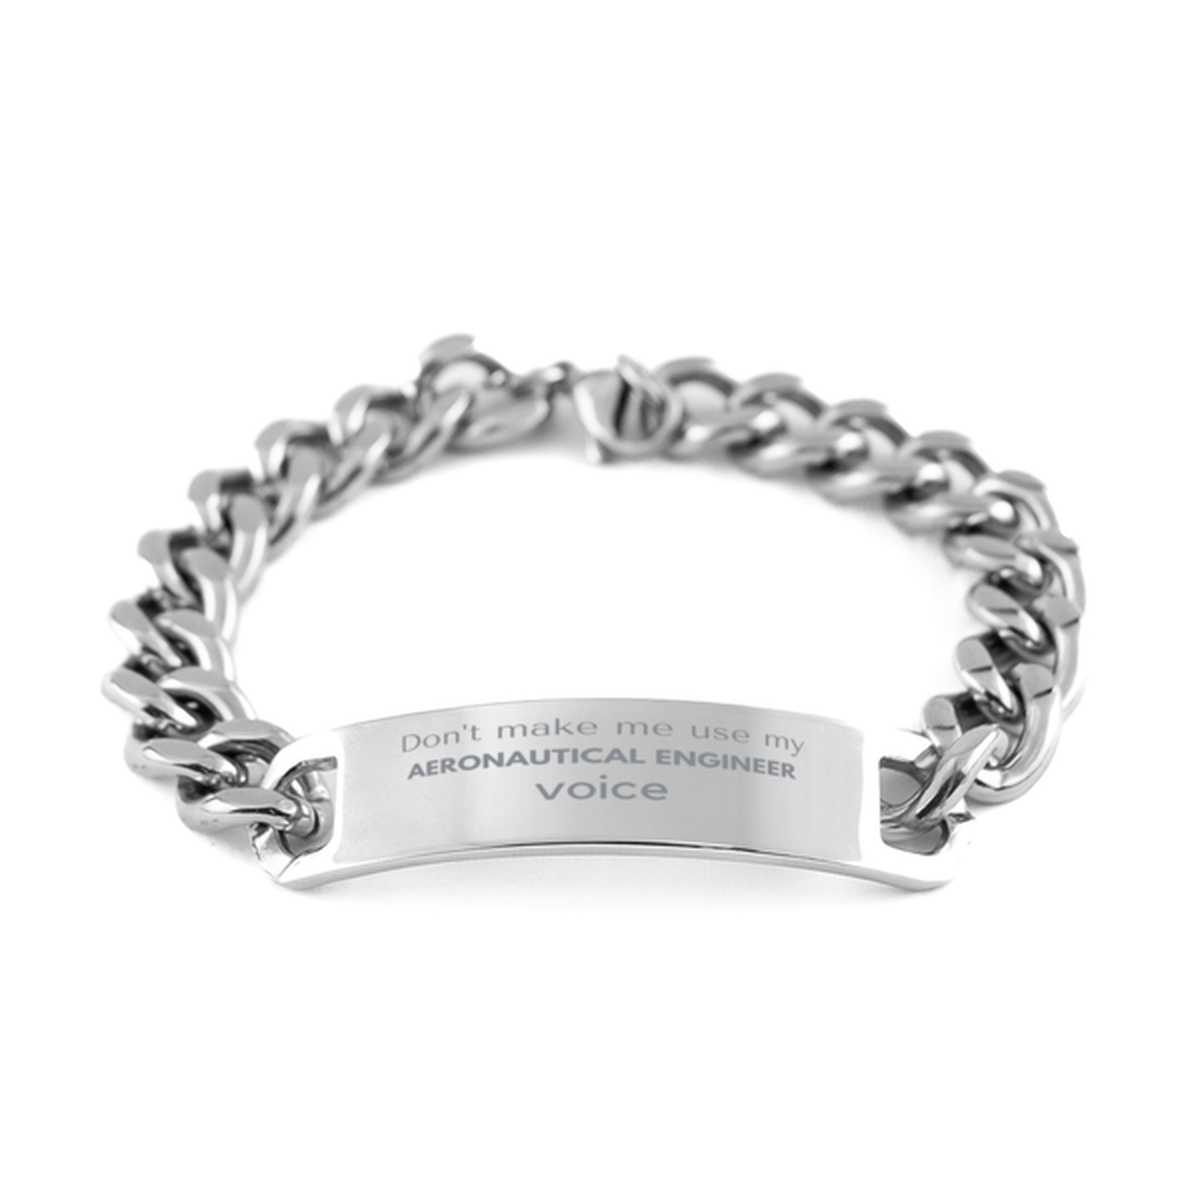 Don't make me use my Aeronautical Engineer voice, Sarcasm Aeronautical Engineer Gifts, Christmas Aeronautical Engineer Cuban Chain Stainless Steel Bracelet Birthday Unique Gifts For Aeronautical Engineer Coworkers, Men, Women, Colleague, Friends